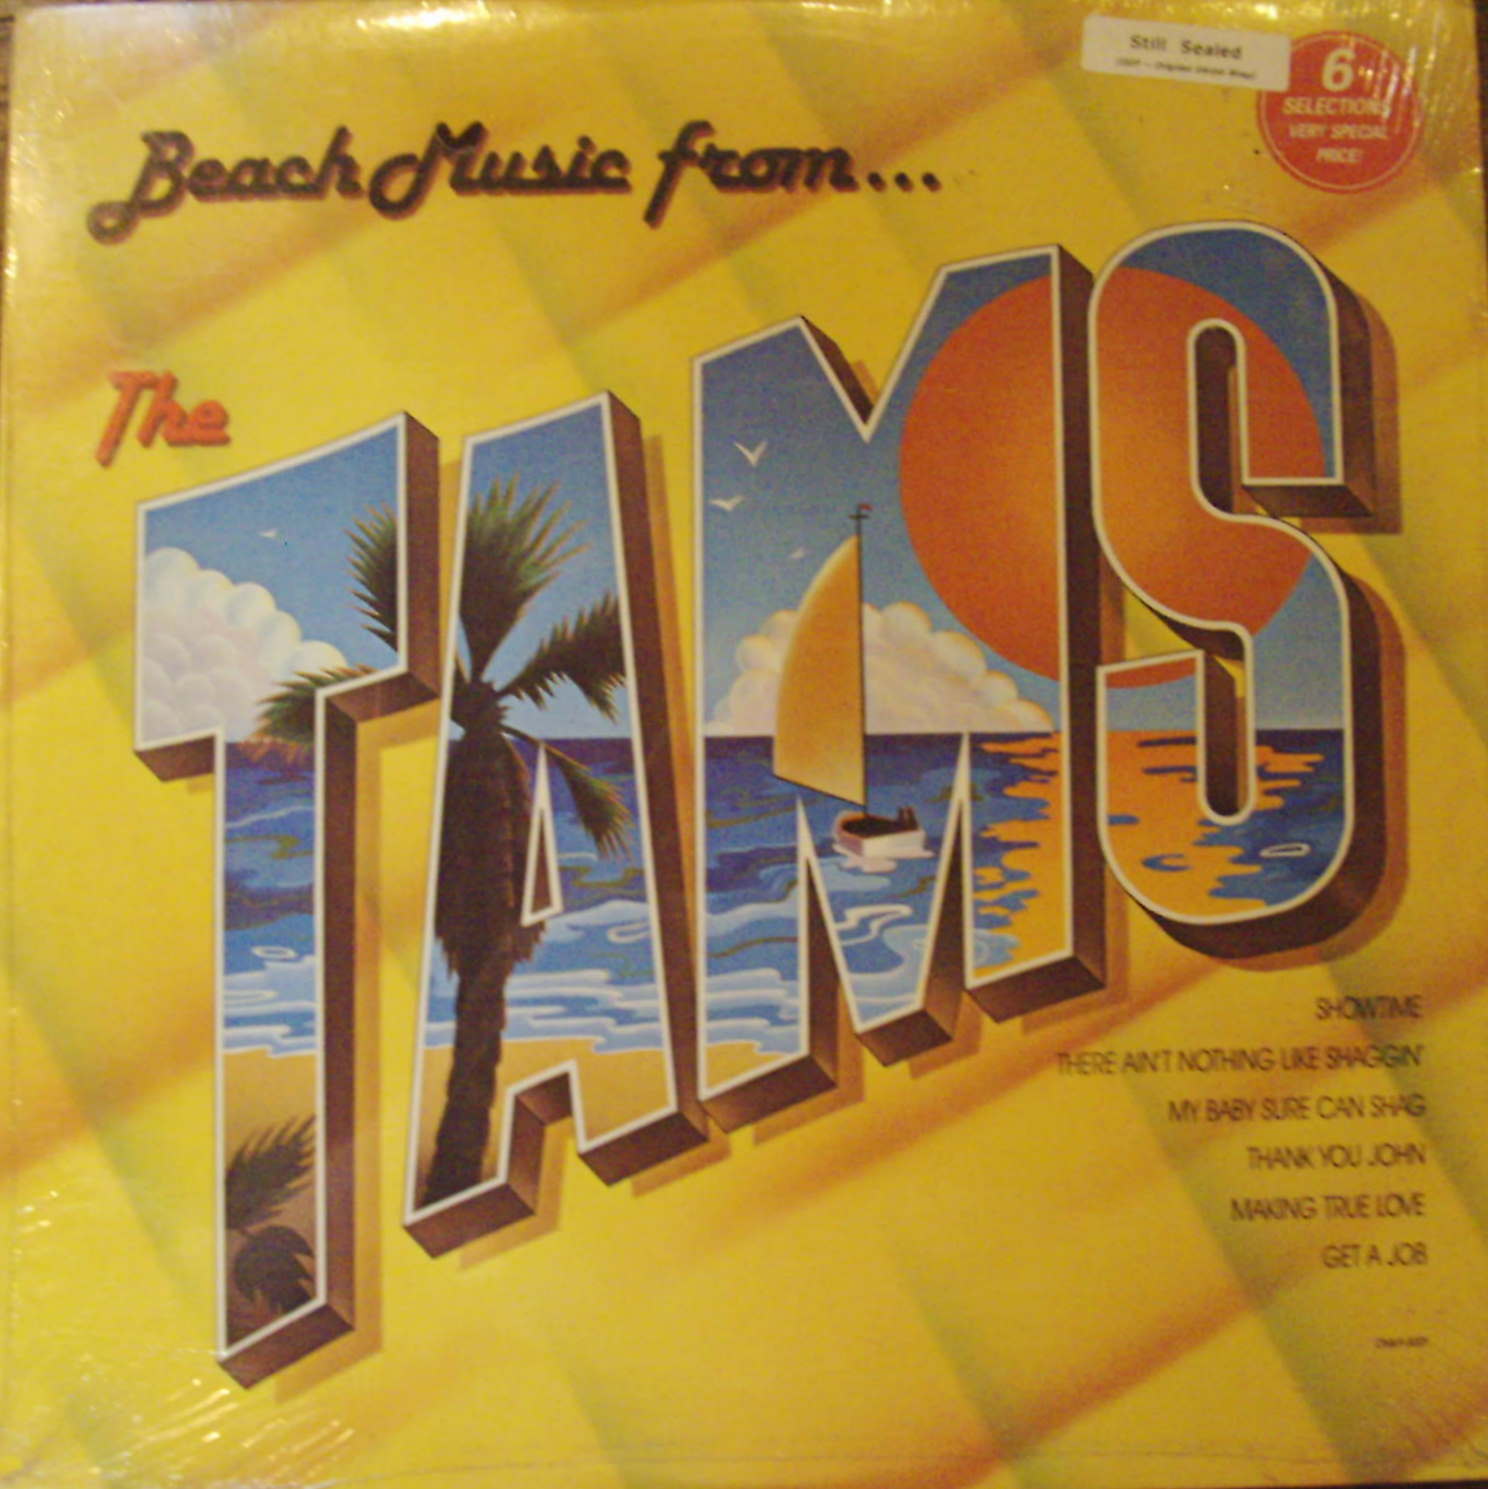 Tams / Beach Music from the Tams